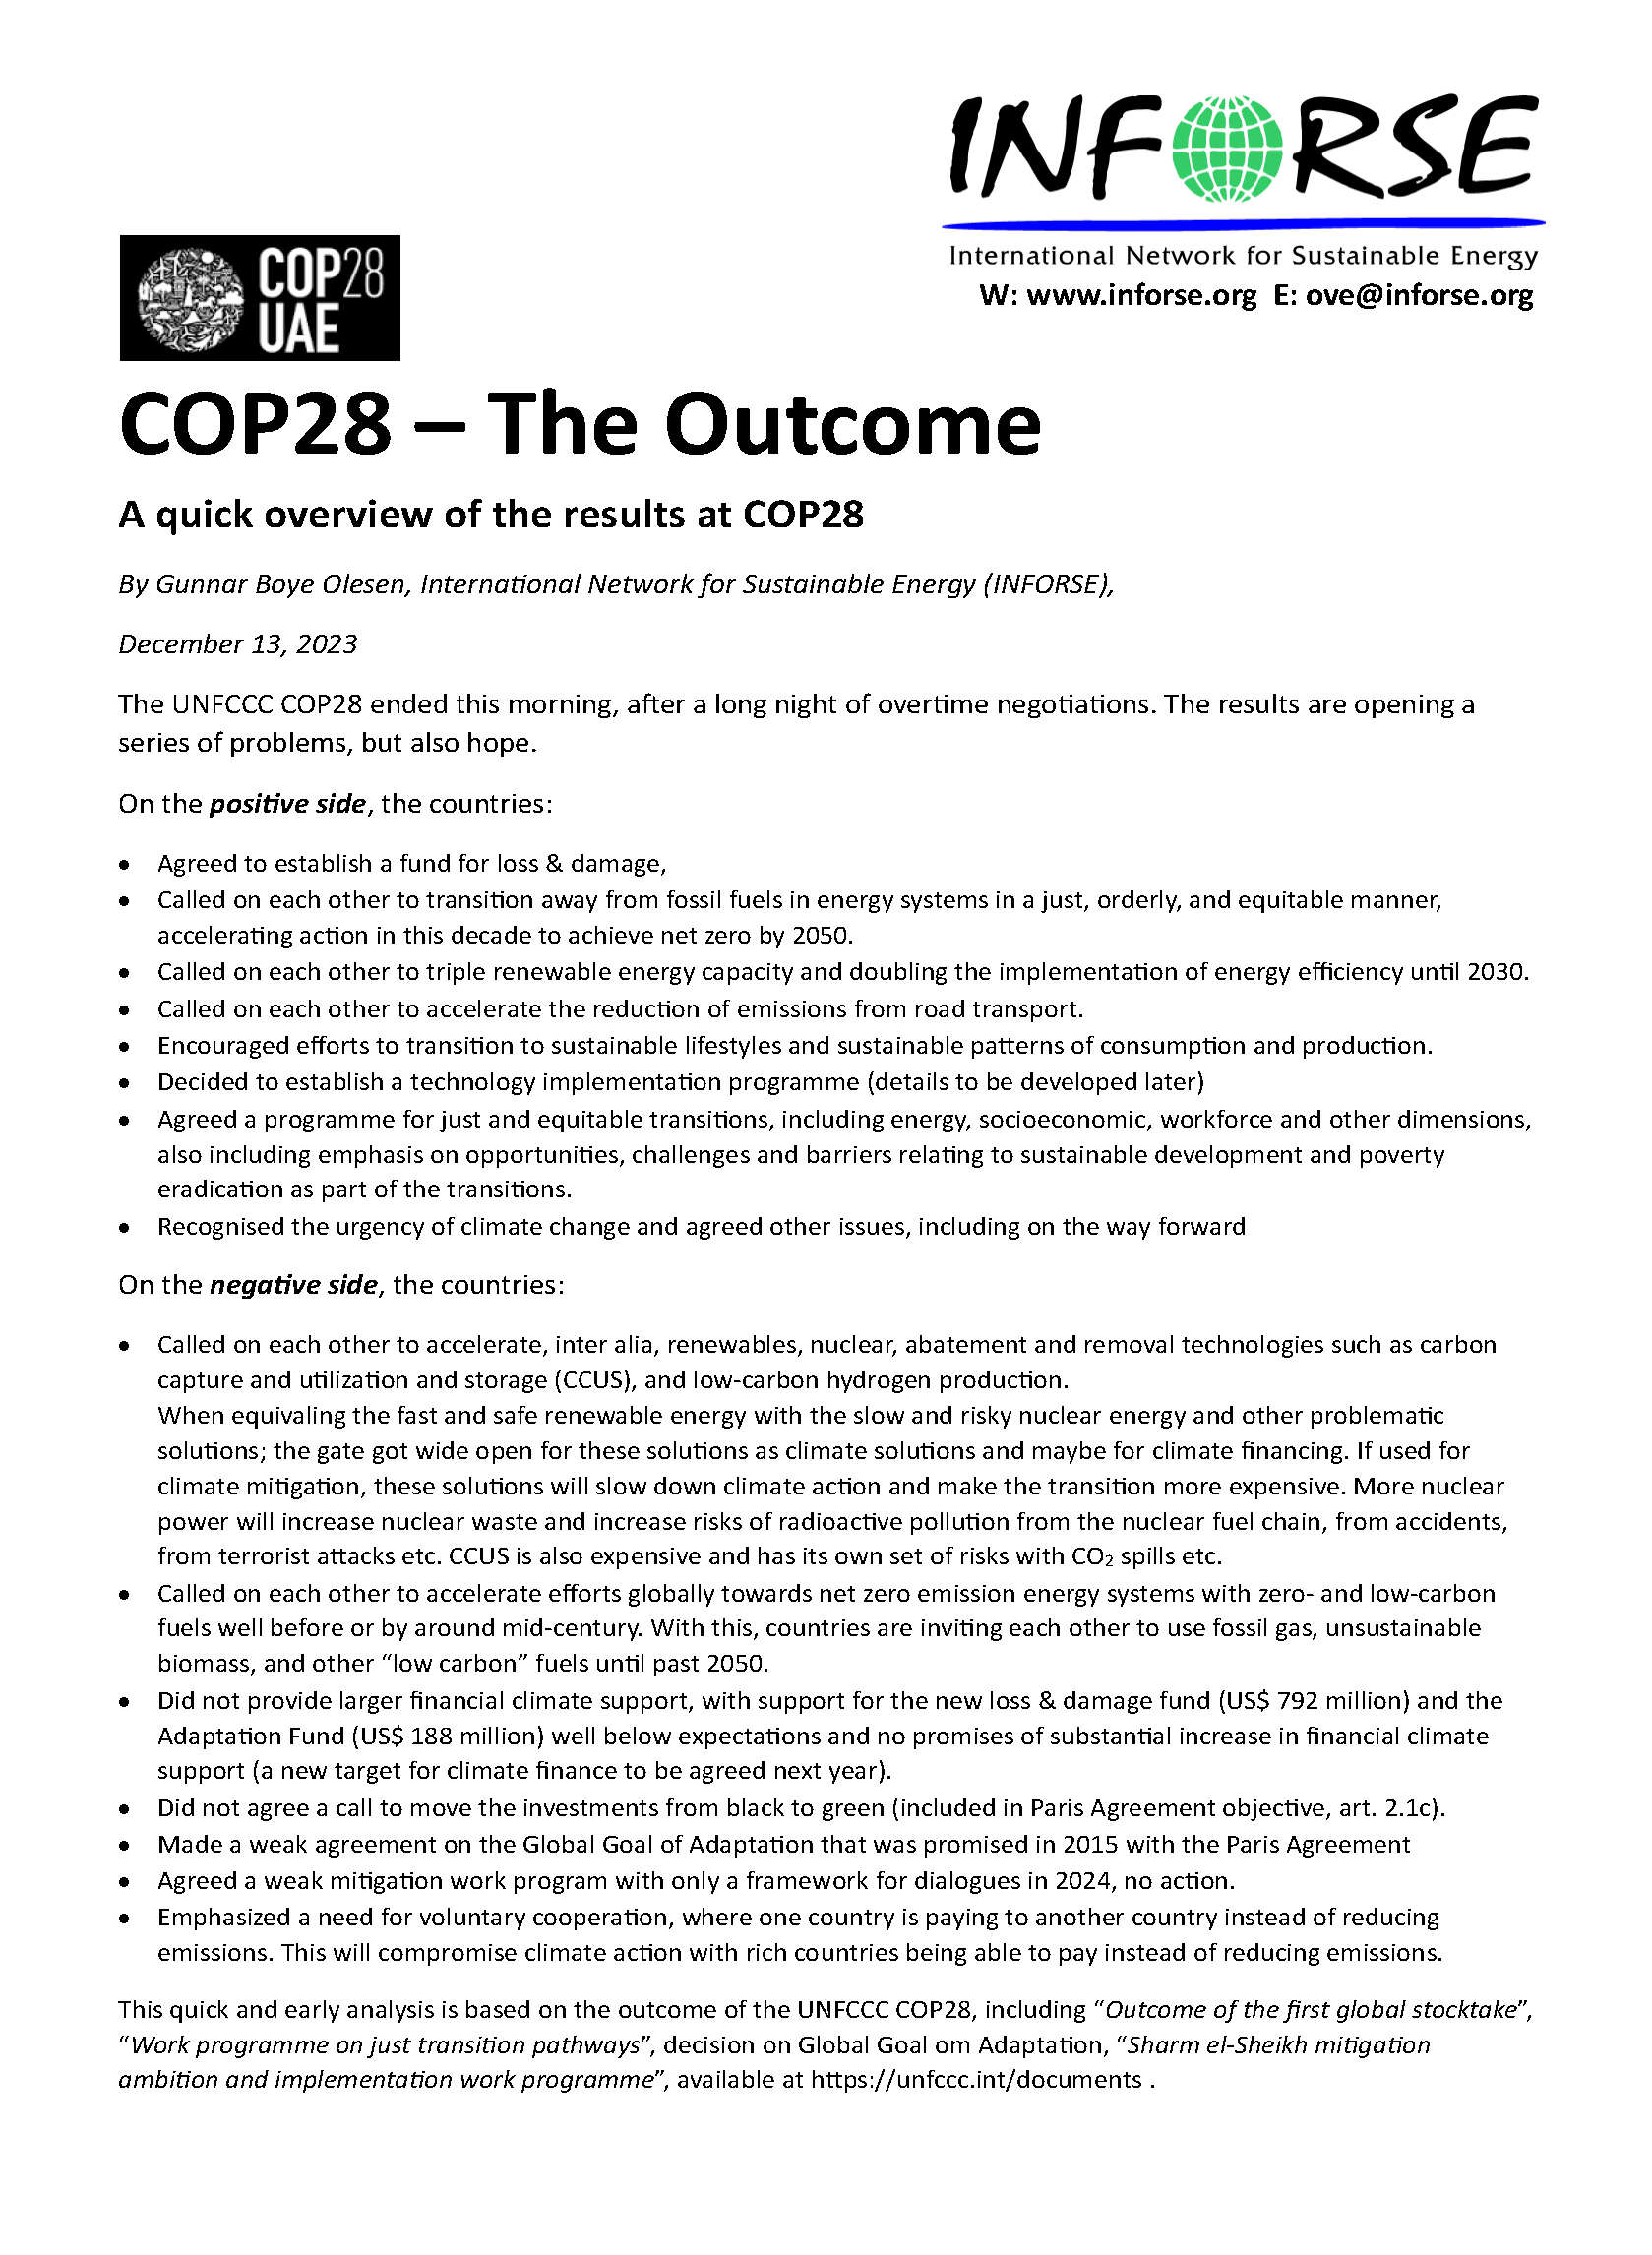 COP28 outcome by INFORSE